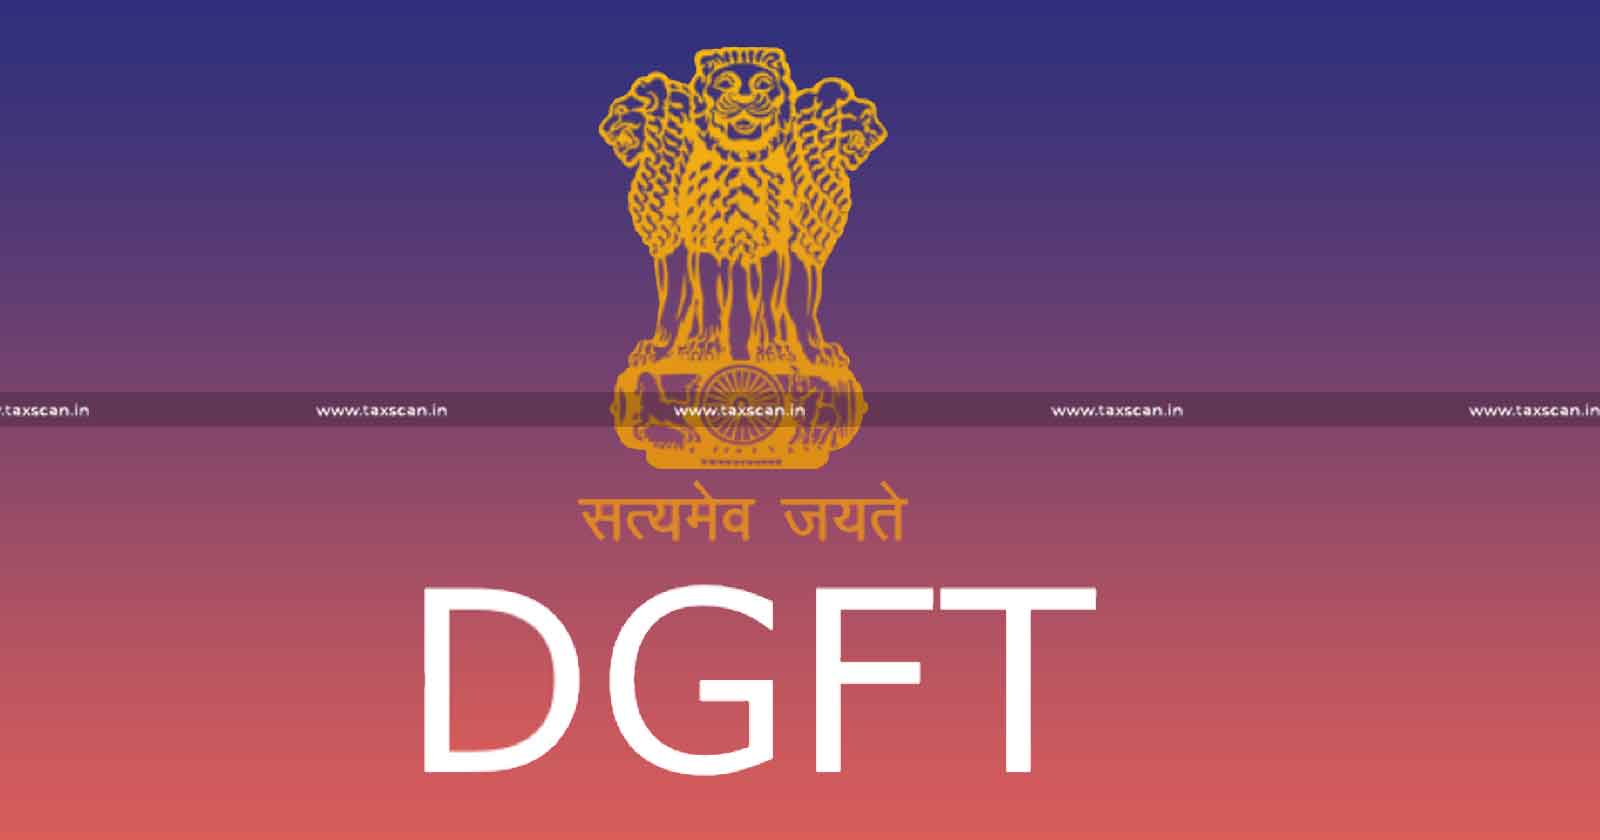 DGFT - Launch - Launch of Revamped Electronic Bank Realisation Certificate - Electronic Bank Realisation Certificate - taxscan